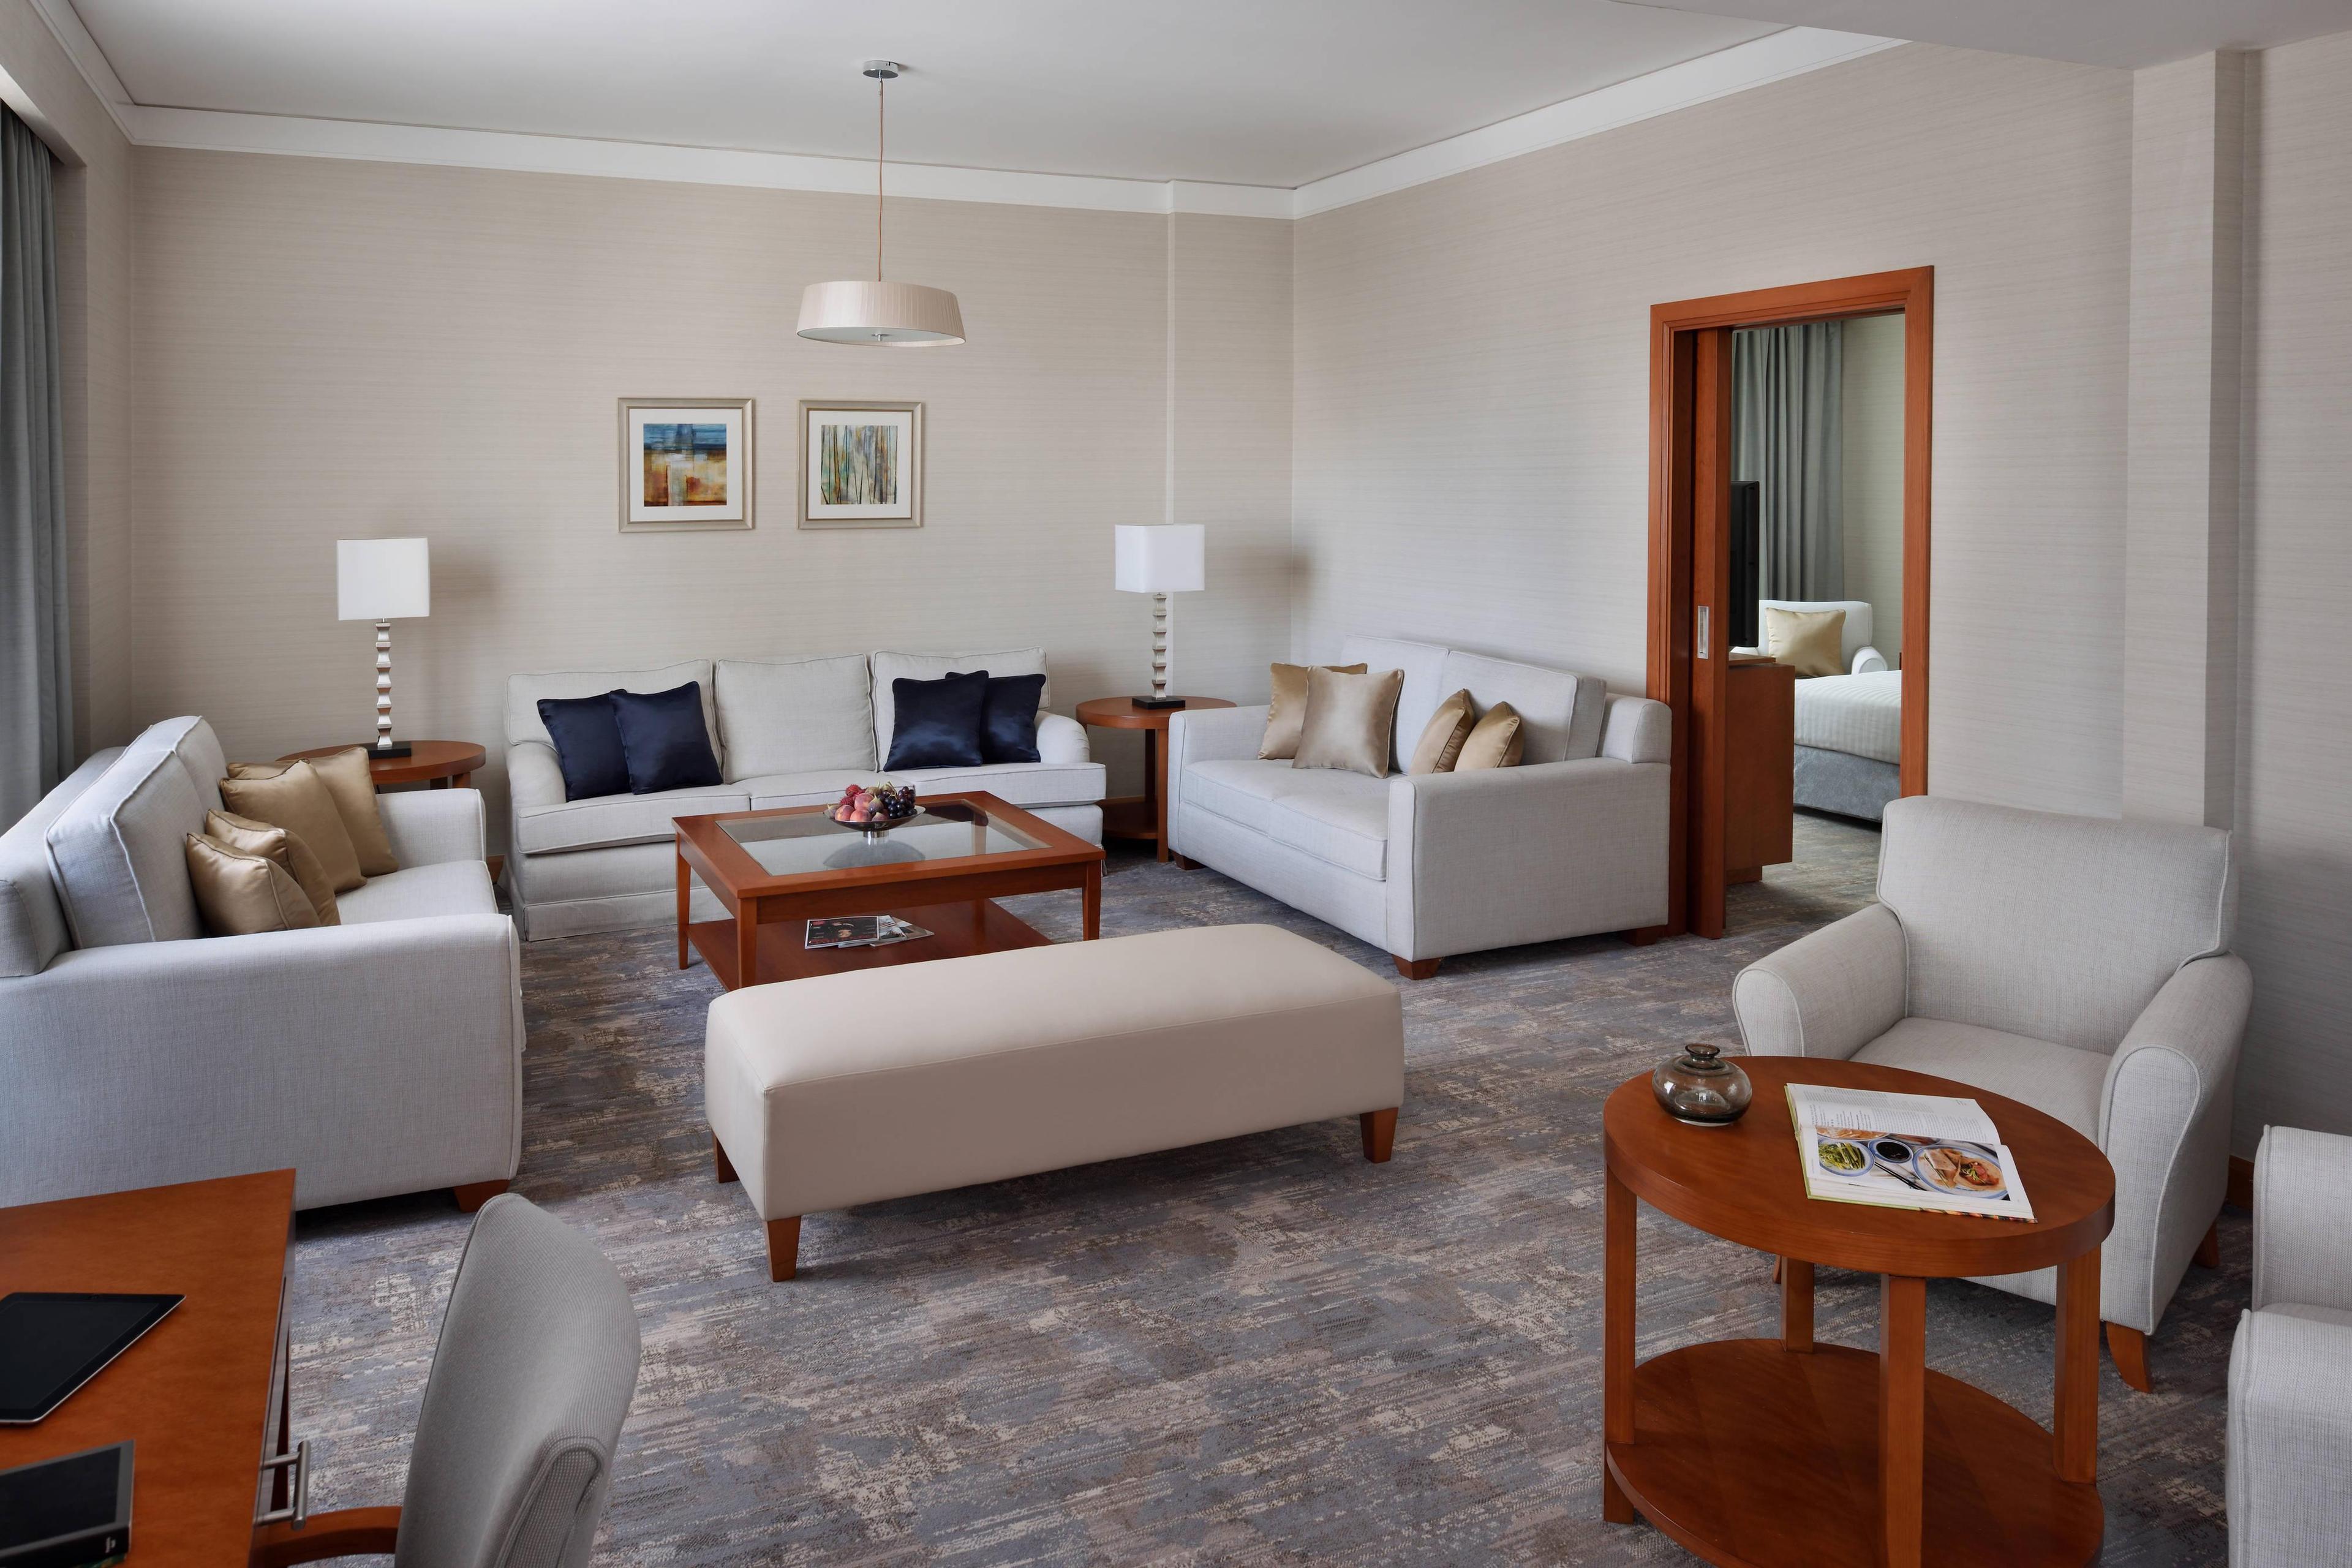 All Executive Suites feature a spacious living room, a private bedroom equipped with 55-inch LCD TVs, luxury bedding, separate bath tub and shower. Free wireless high-speed Internet access is available. Guests have access to the Executive Lounge.